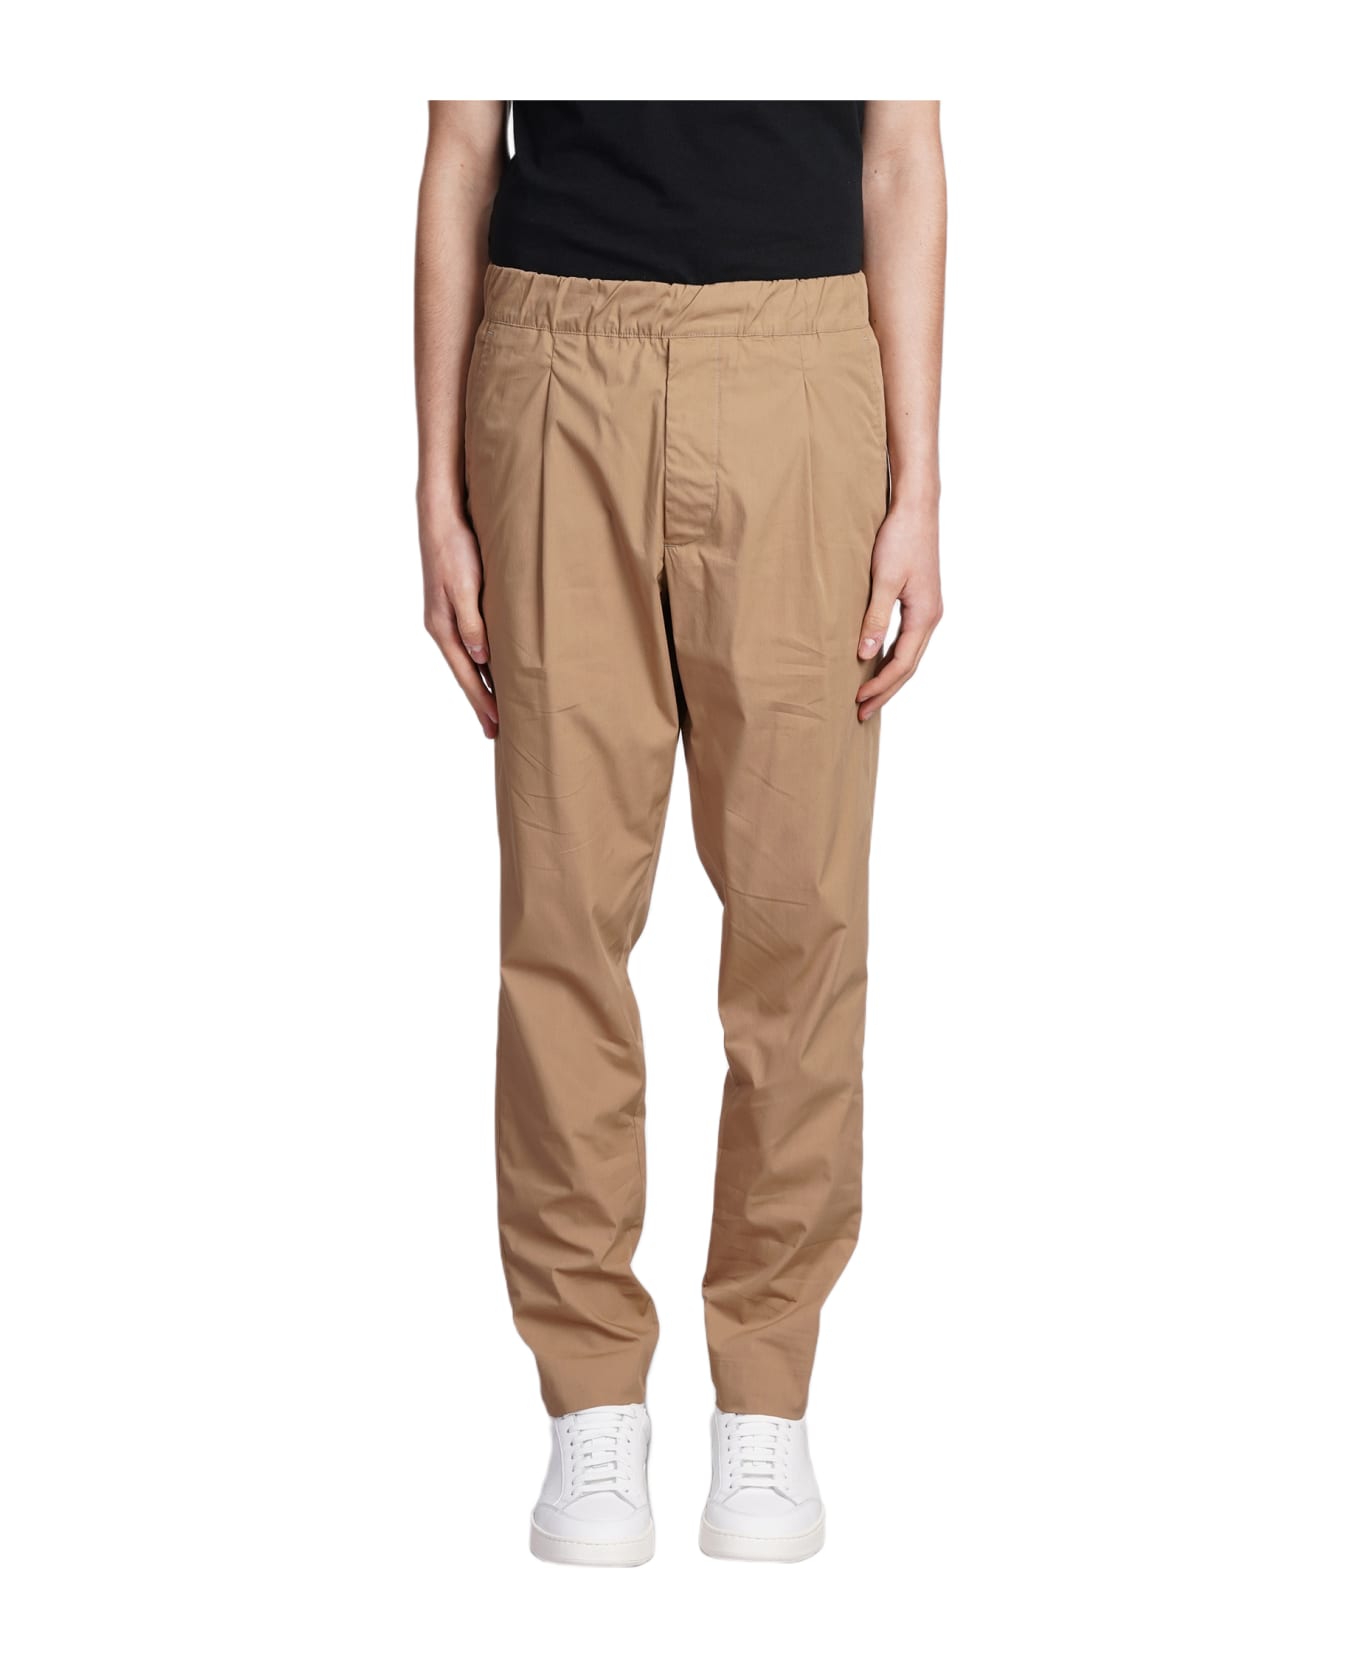 Low Brand Patrick Pants In Camel Cotton - Camel